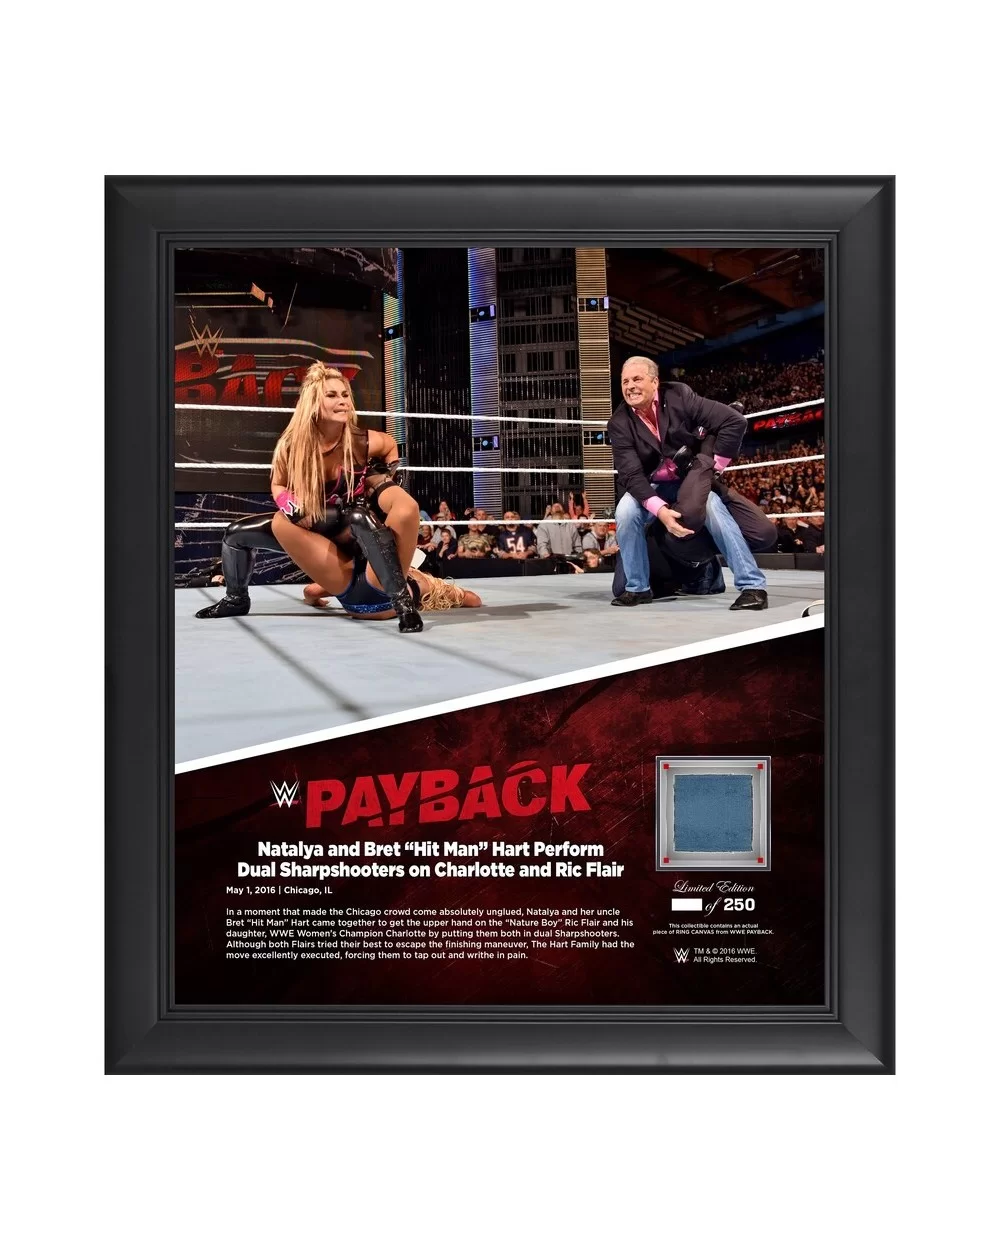 Natalya Framed 15" x 17" 2016 Payback Collage with a Piece of Match-Used Canvas - Limited Edition of 250 $16.80 Home & Office